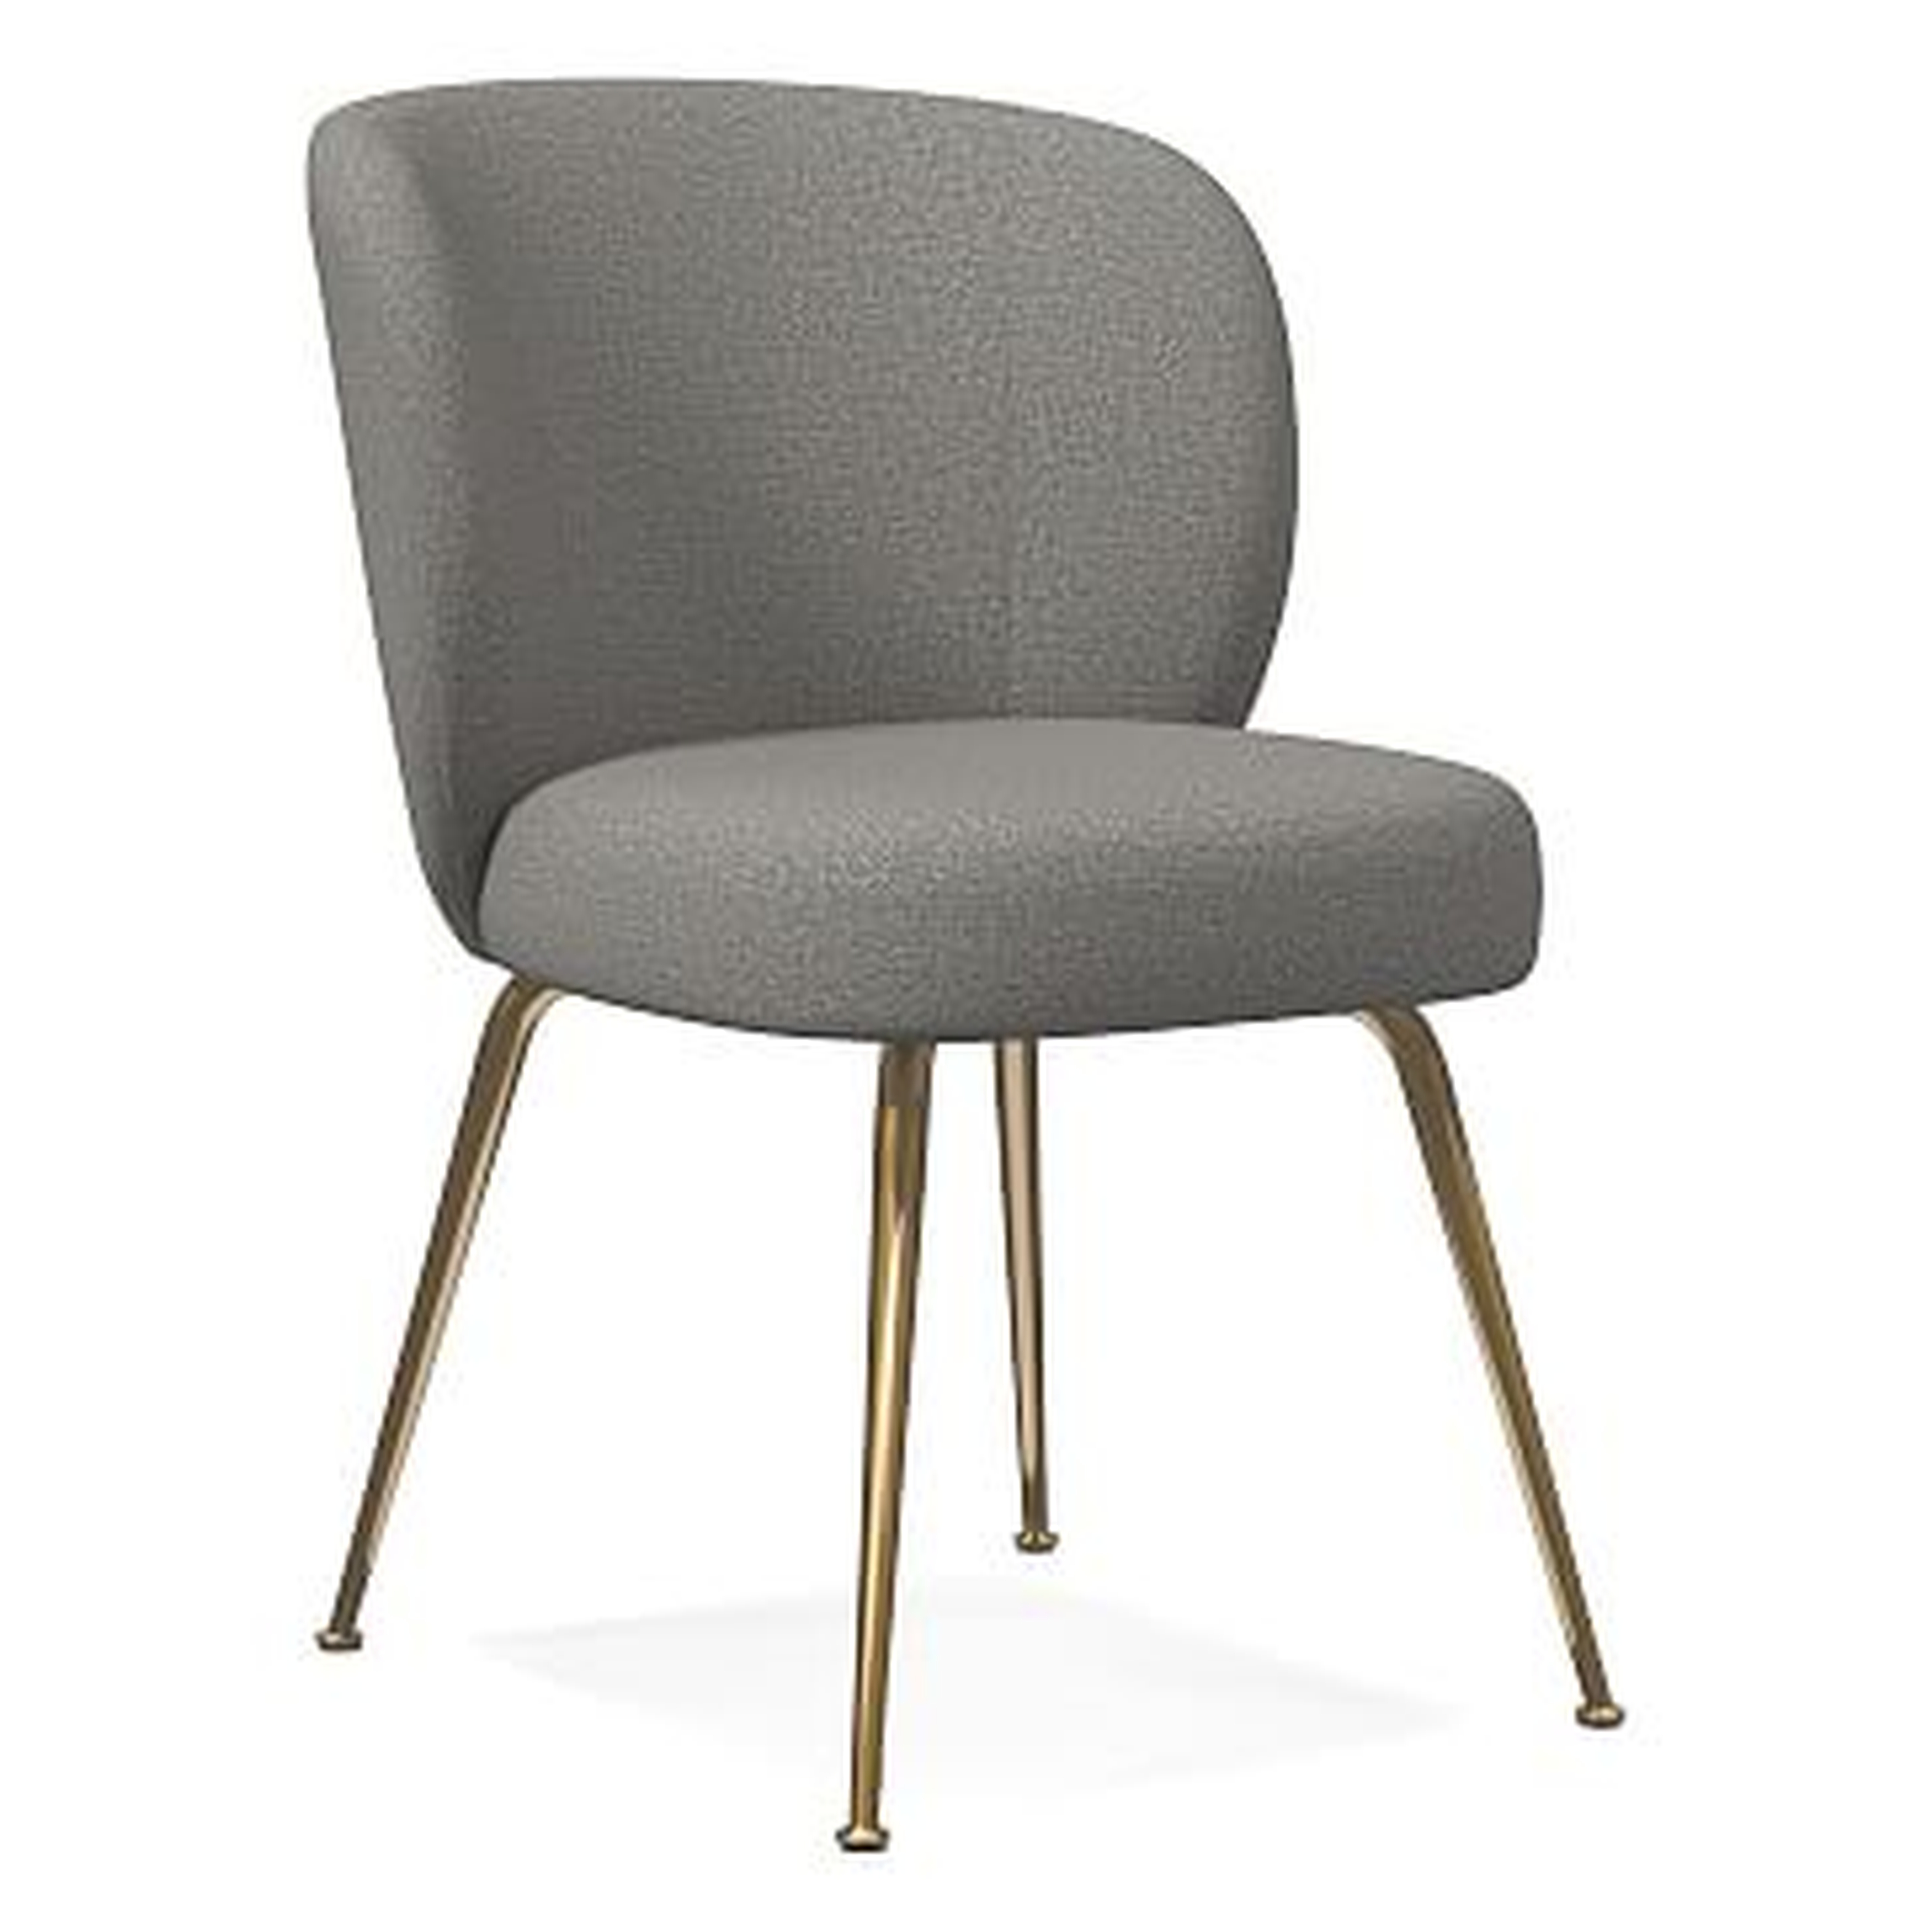 Greer Dining Chair, Chenille Tweed, Feather Gray, Light Bronze - West Elm